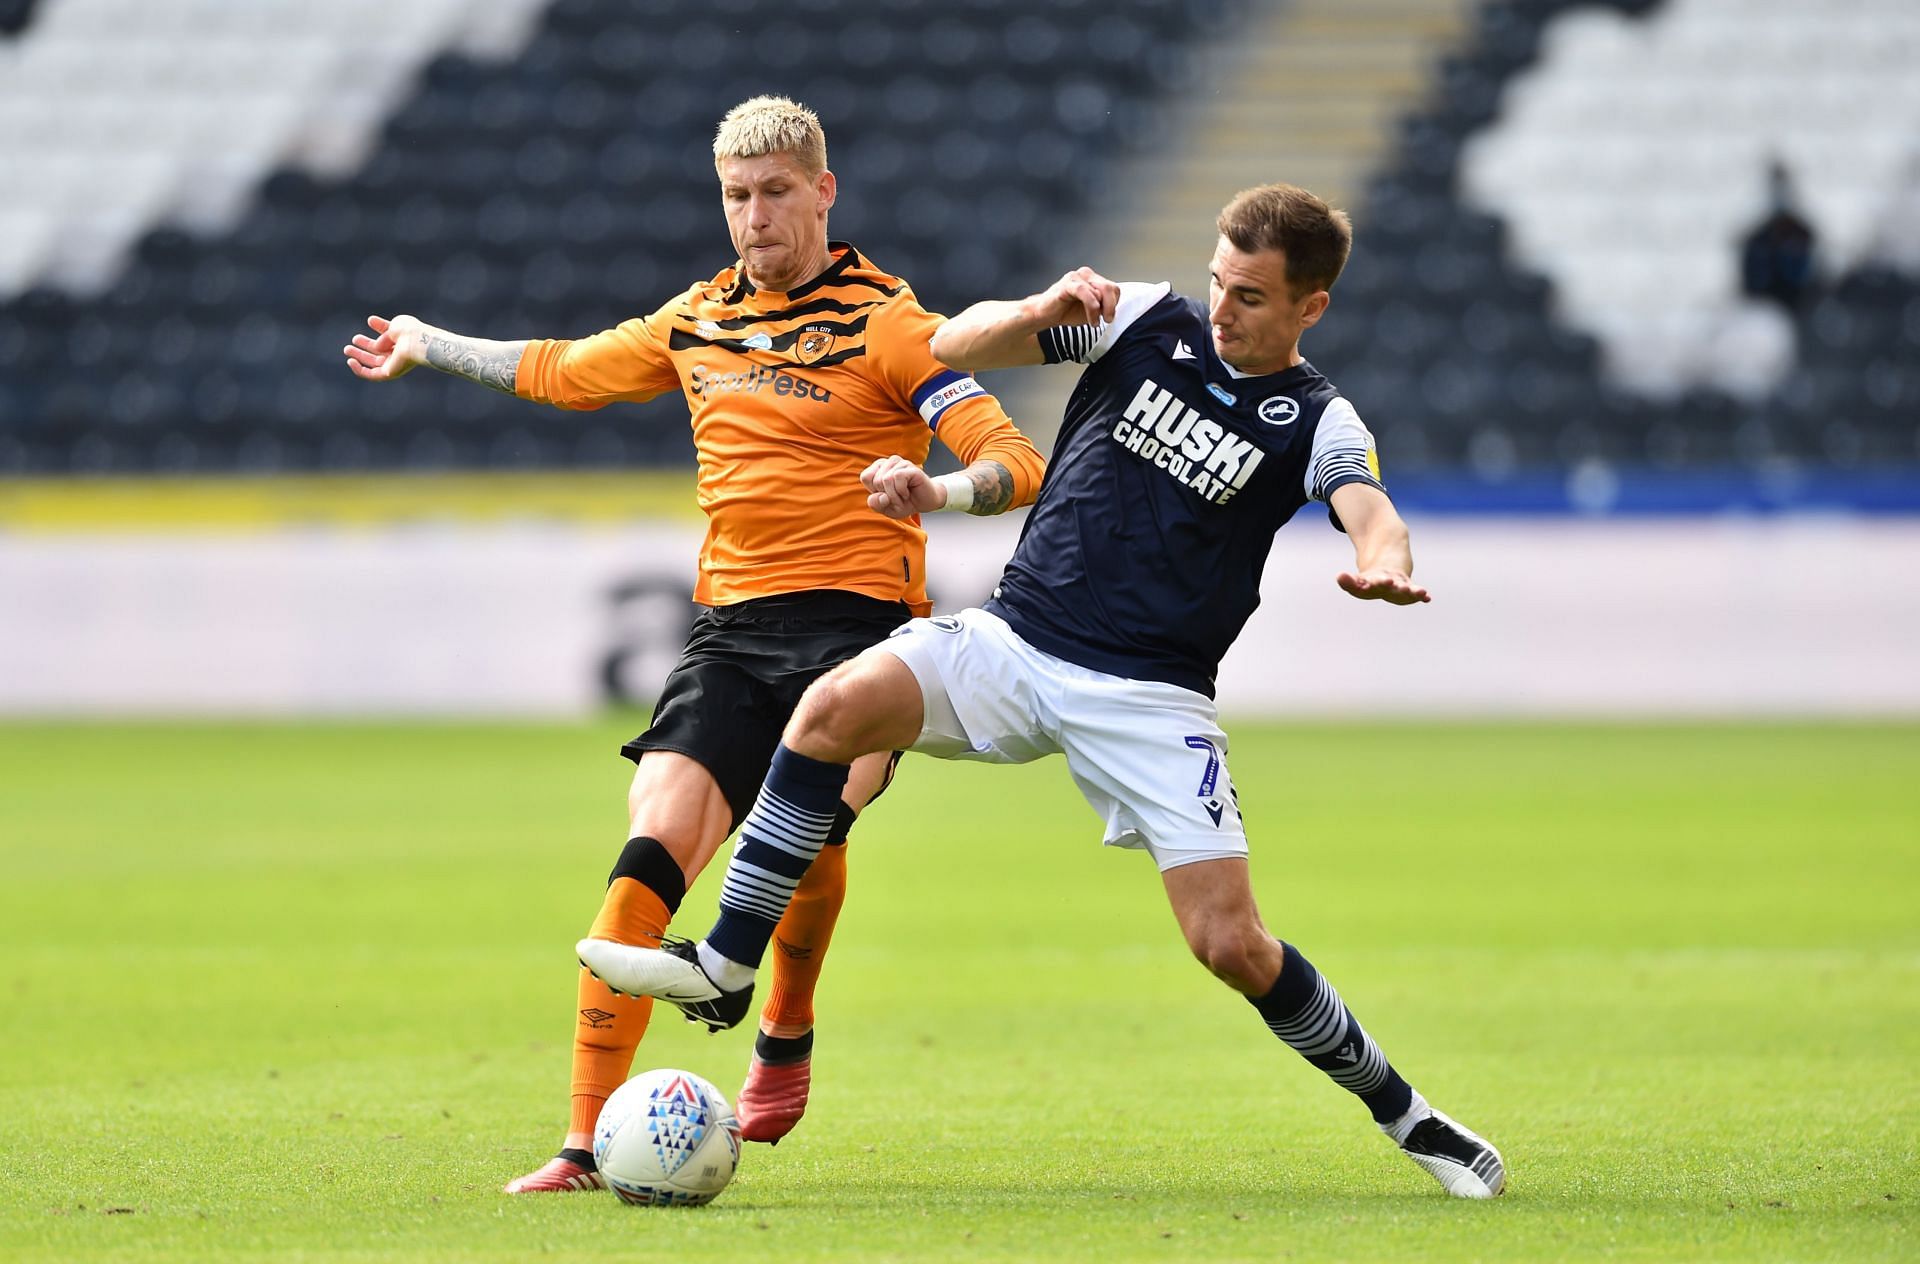 Hull City will visit the Den to face Millwall on Monday.